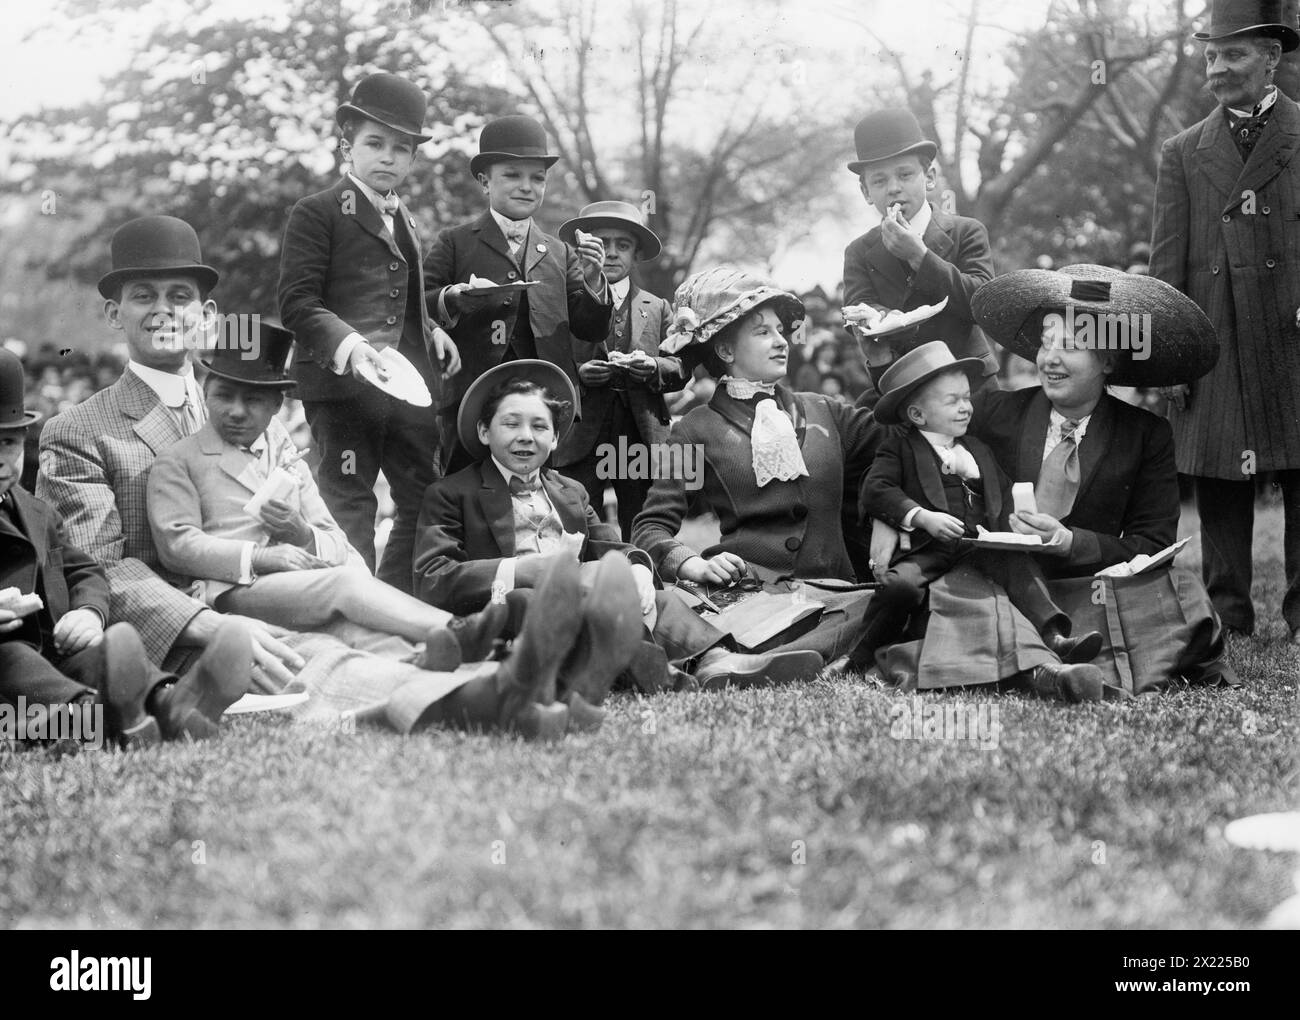 Midgets May Party - Central Park. Gruppe auf Gras, 1910. Stockfoto